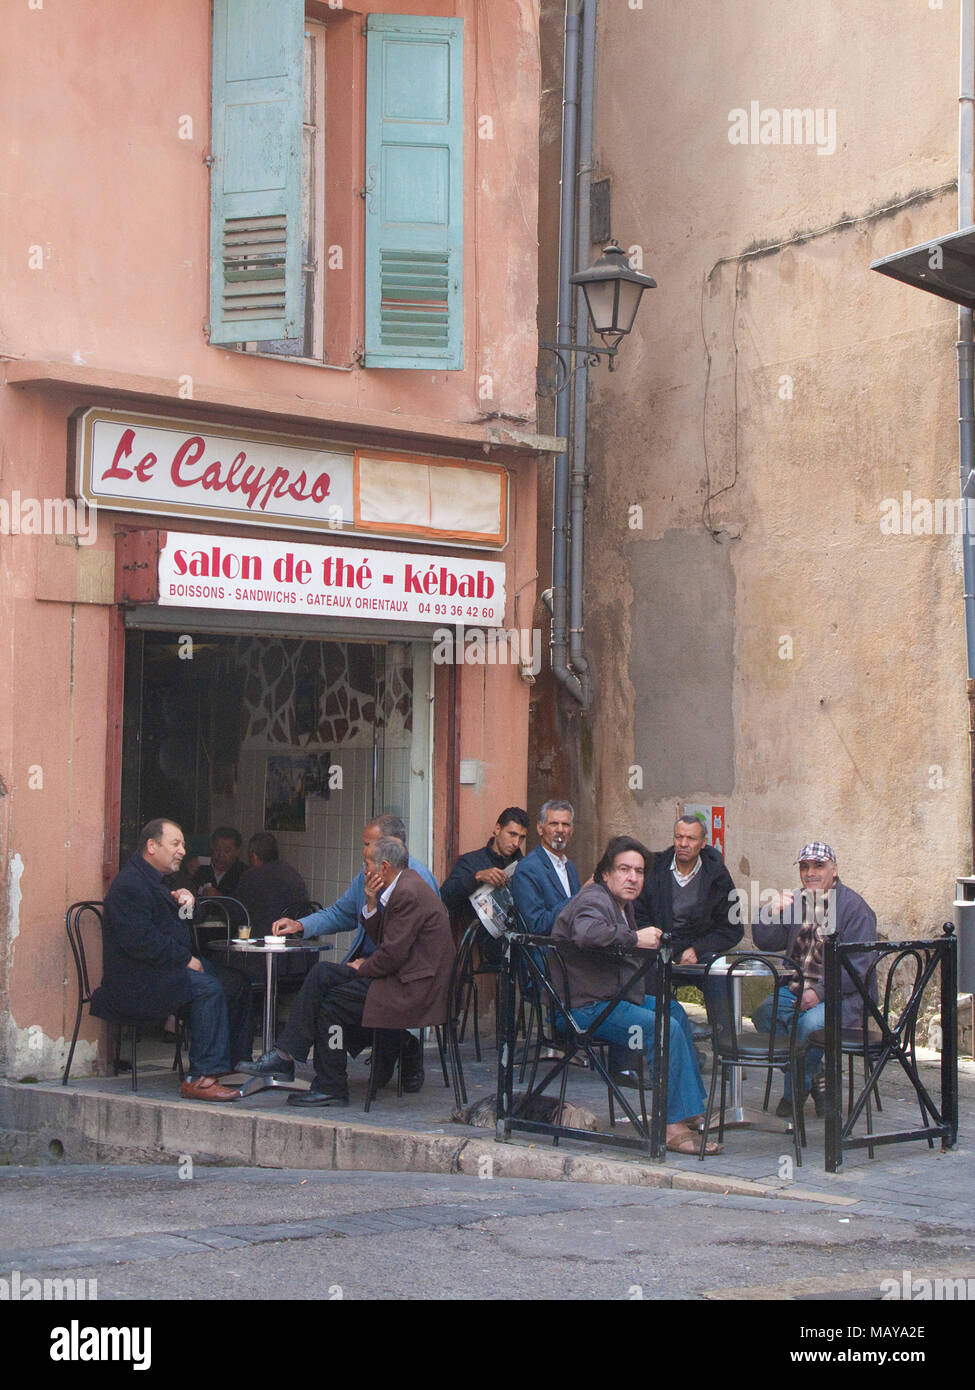 Men at bar at old town of Grasse, Alpes-Maritimes, South France, France, Europe Stock Photo